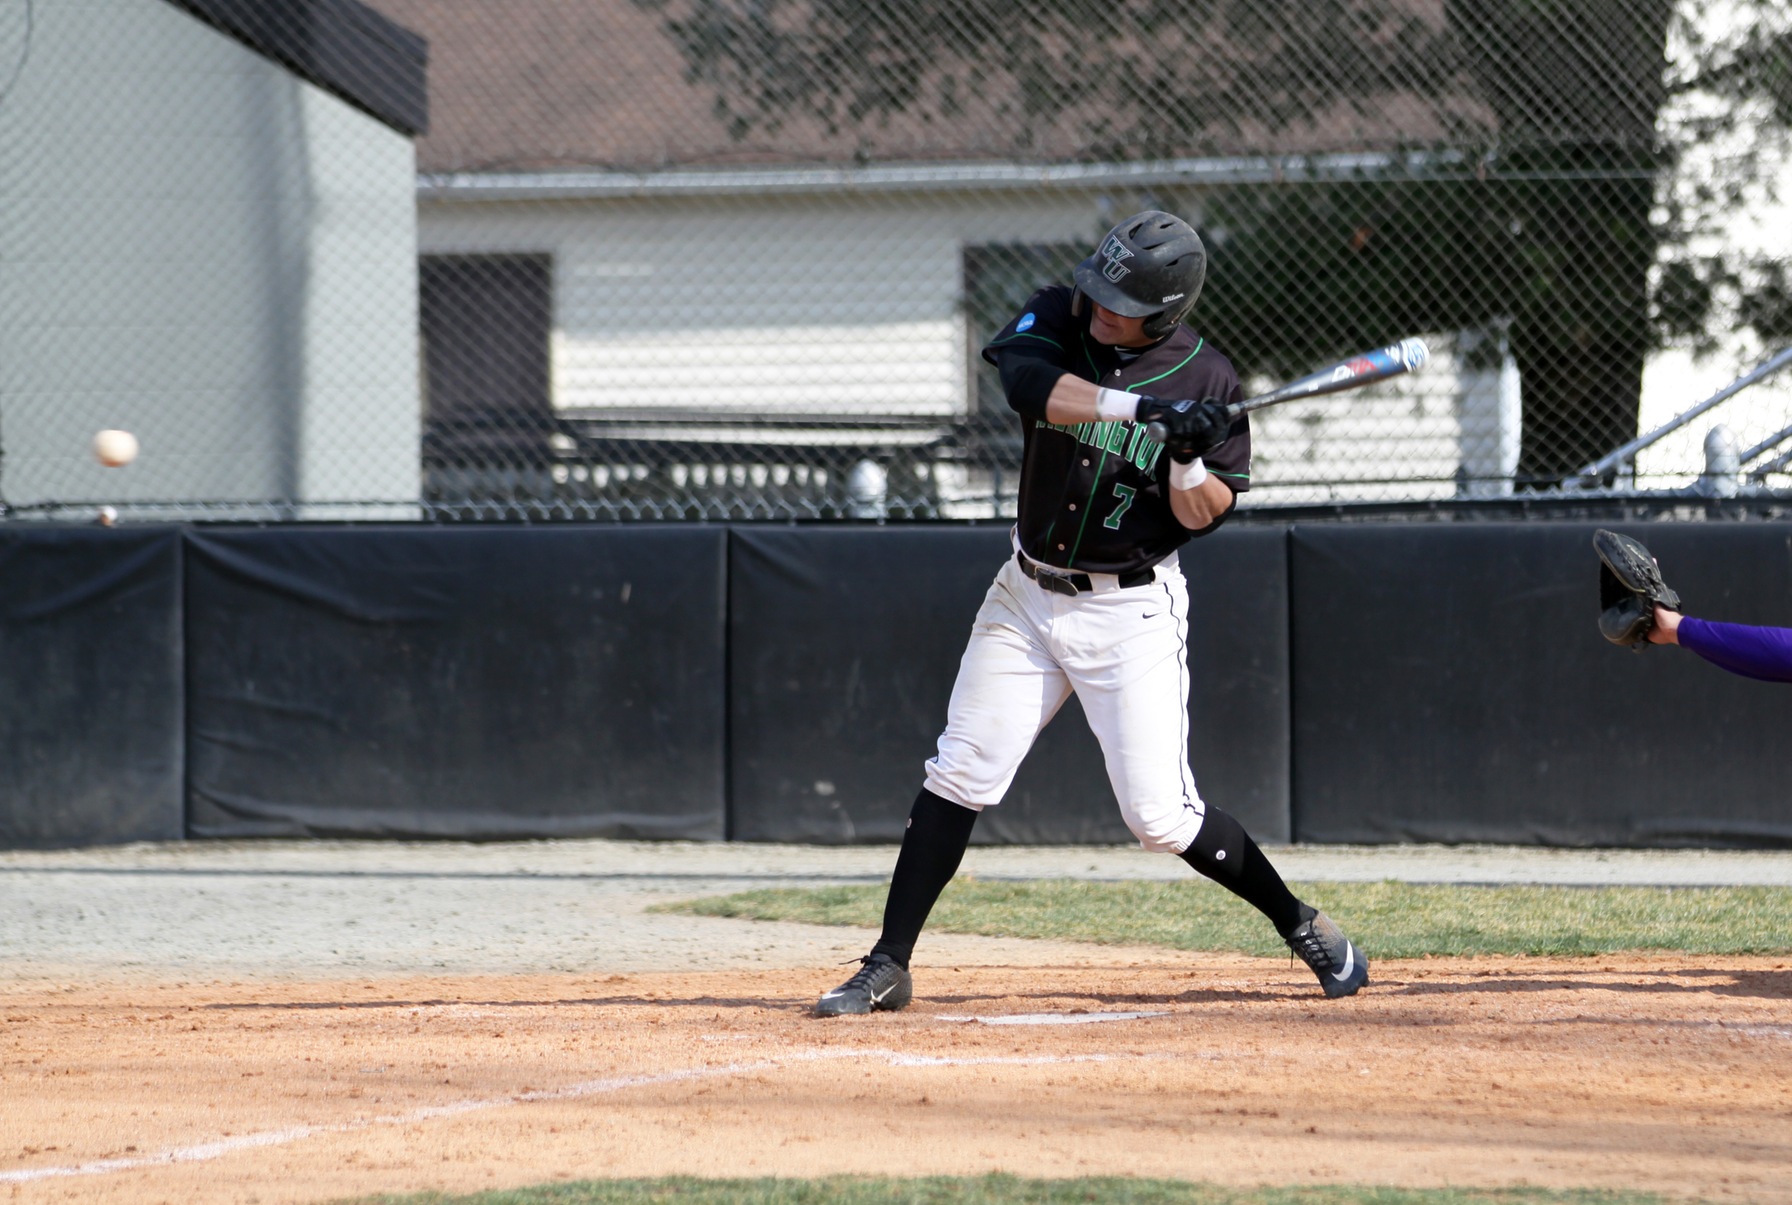 Copyright 2019; Wilmington University. All rights reserved. File photo of Kendall Small. Photo by Dan Lauletta. March 16, 2019 vs. Bridgeport.